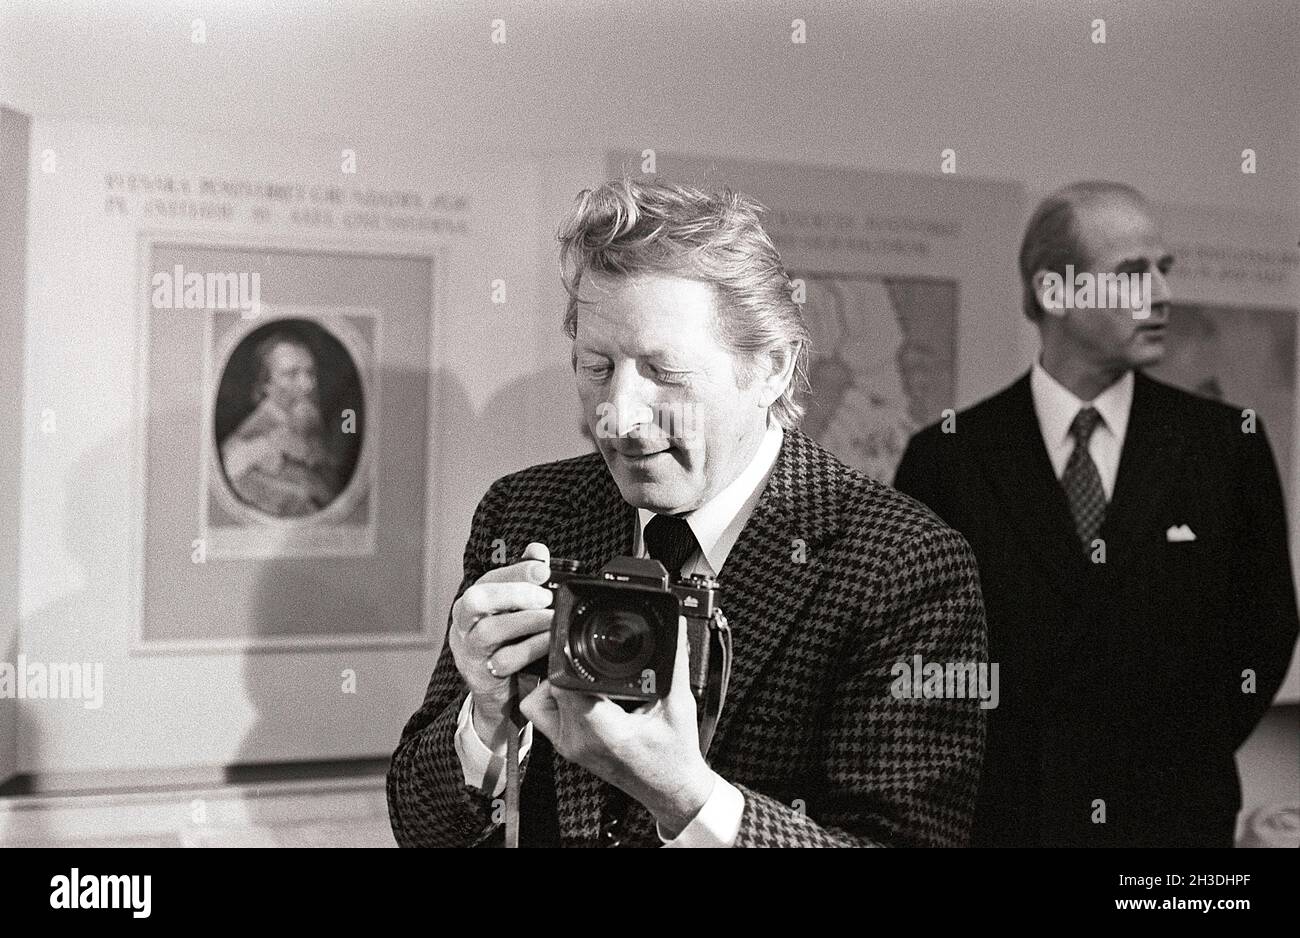 Danny Kaye. American actor etc pictured during a visit to Sweden in december 1974 where he holds a camera.  Ref Kristoffersson EF167 Stock Photo